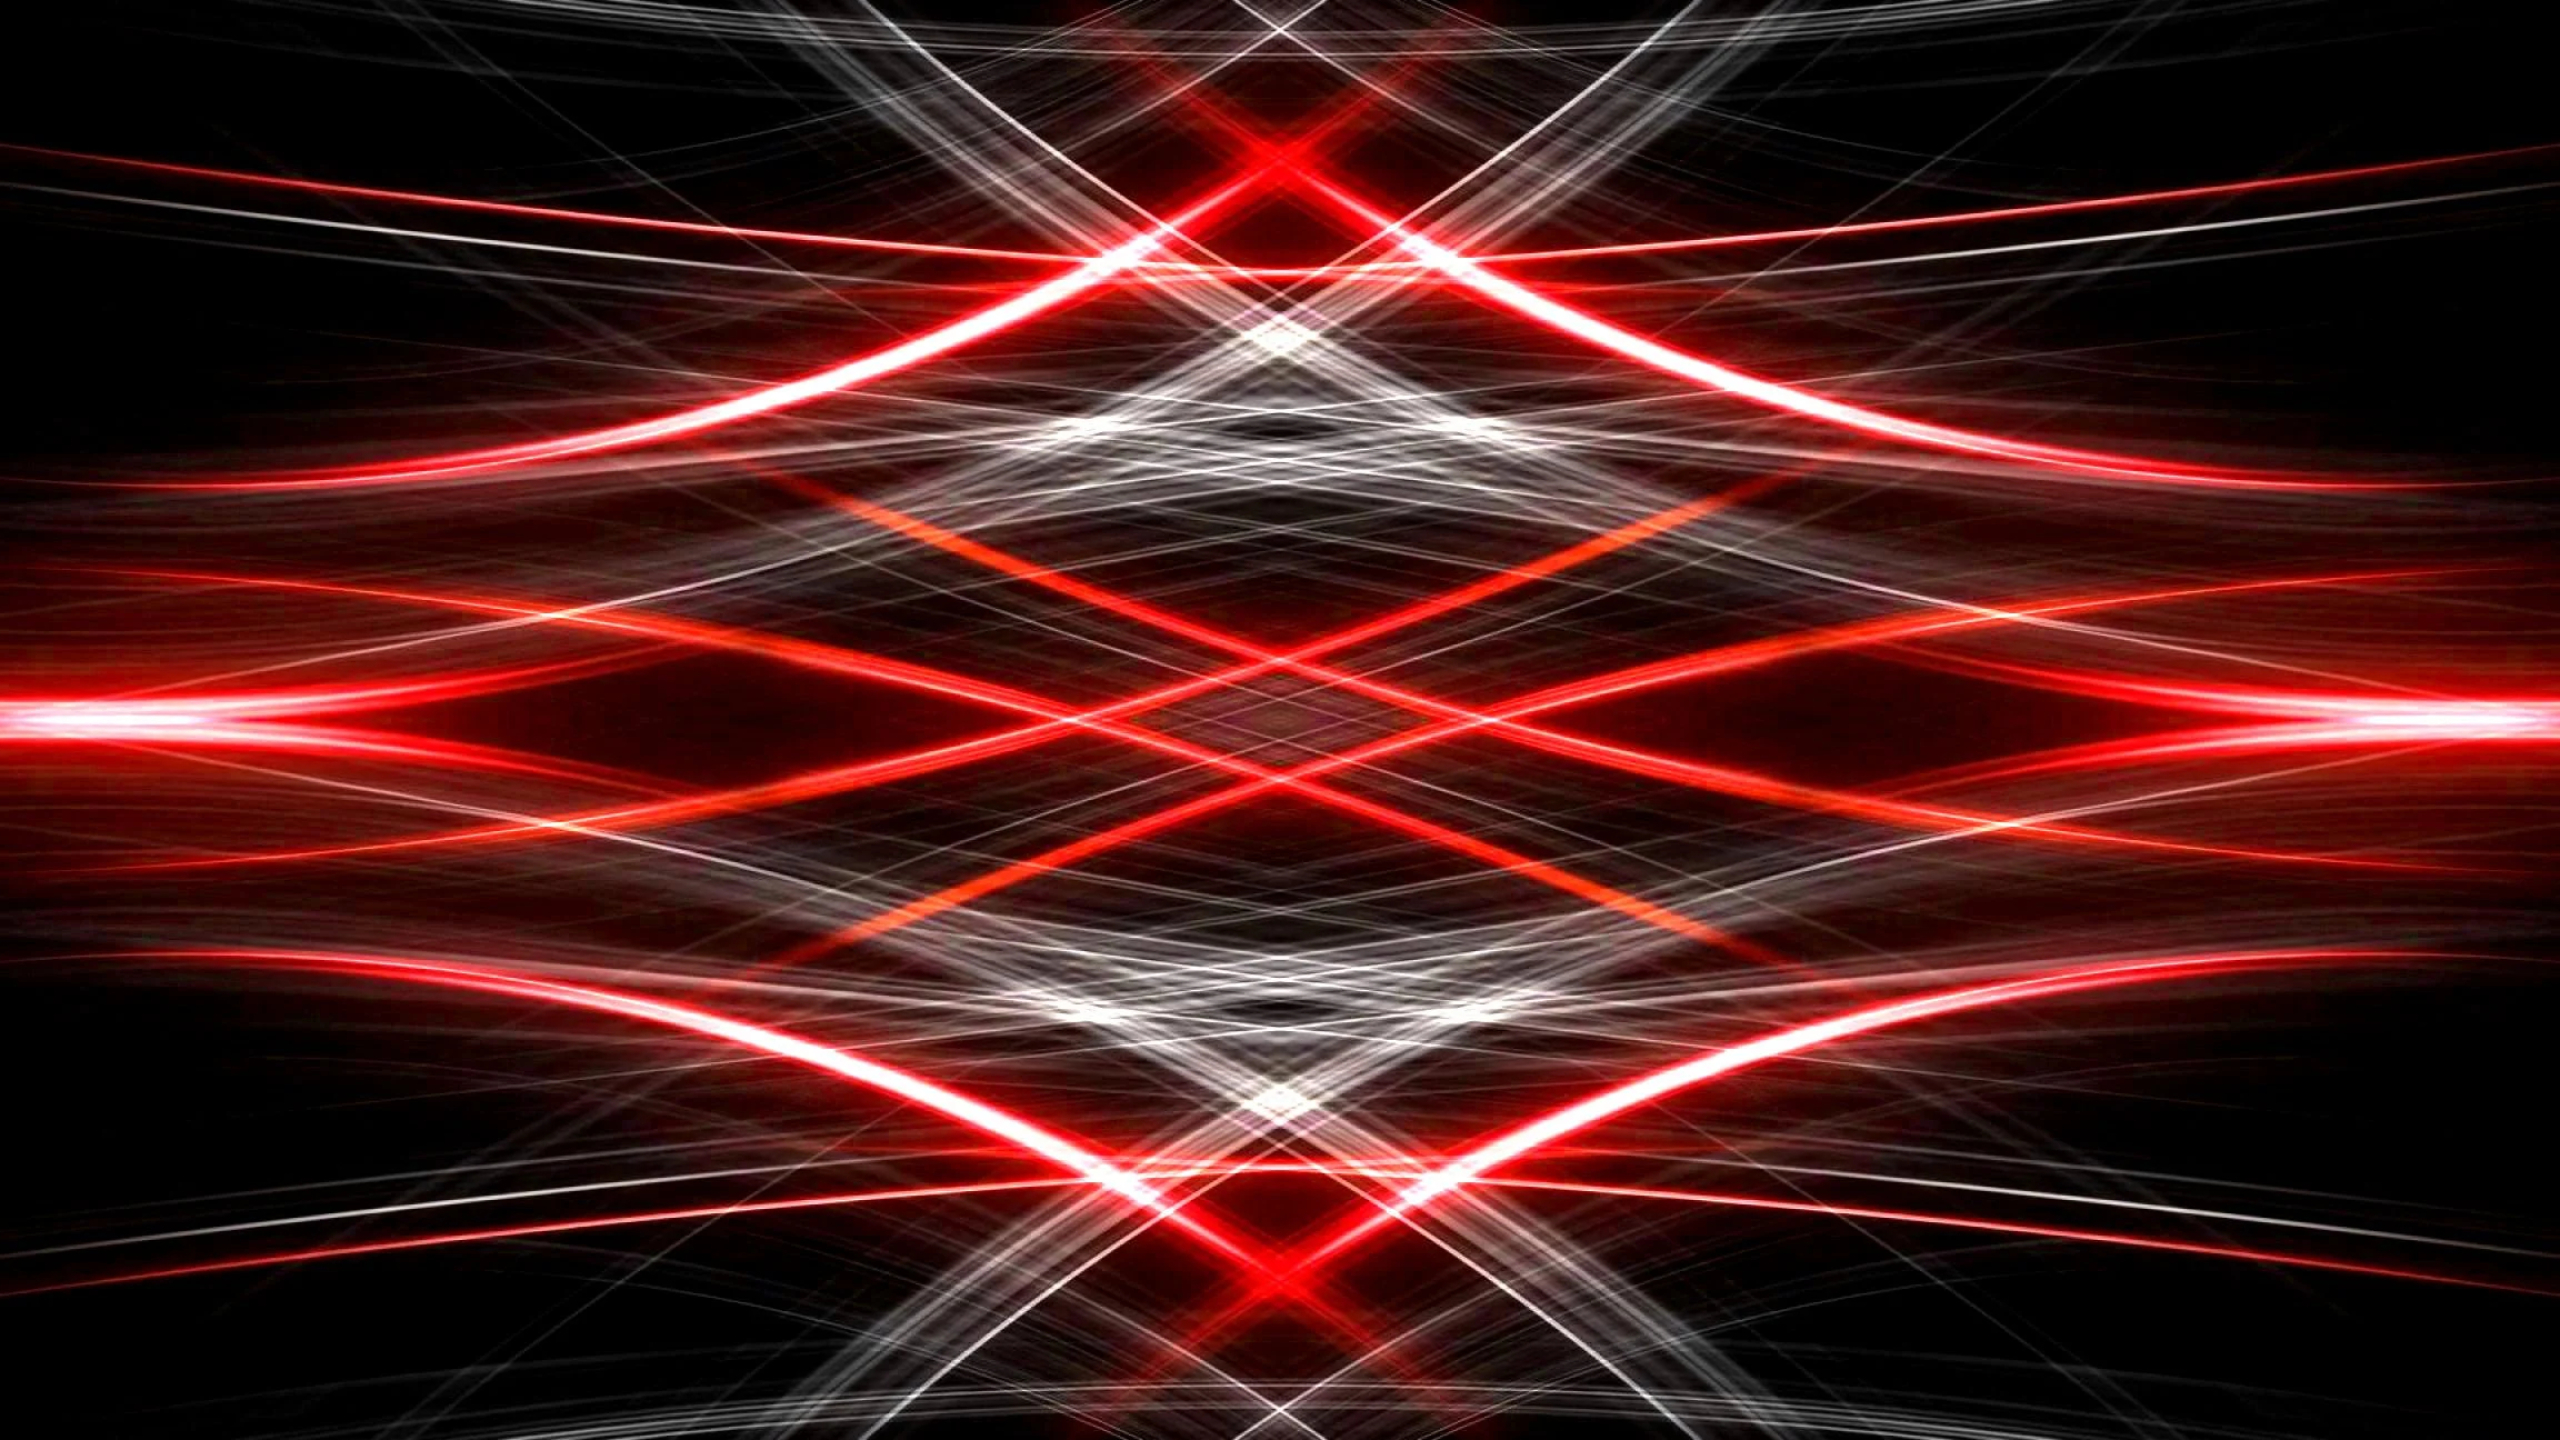 2560x1440 Red and White Abstract Wallpapers Top Free Red and White Abstract Backgrounds